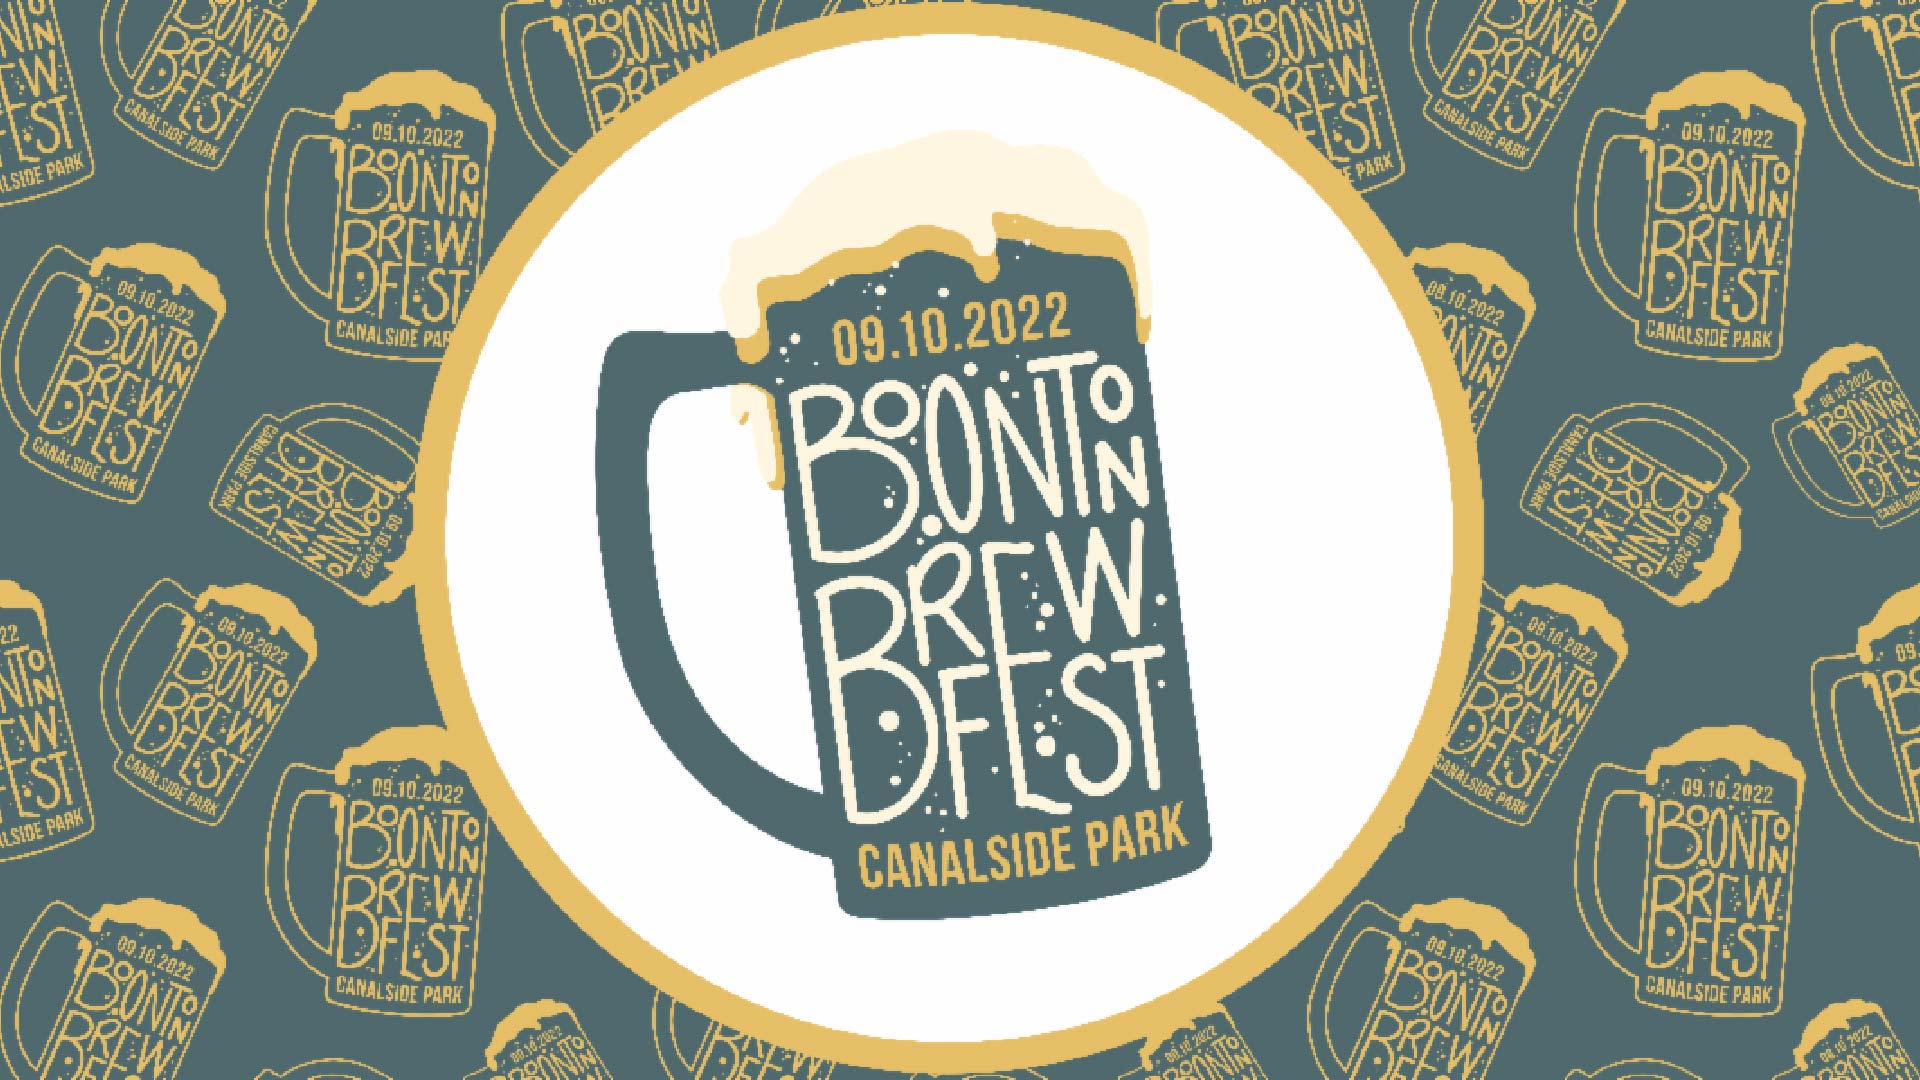 Boonton Brewfest on September 10th at Canal Side Park in Boonton, NJ